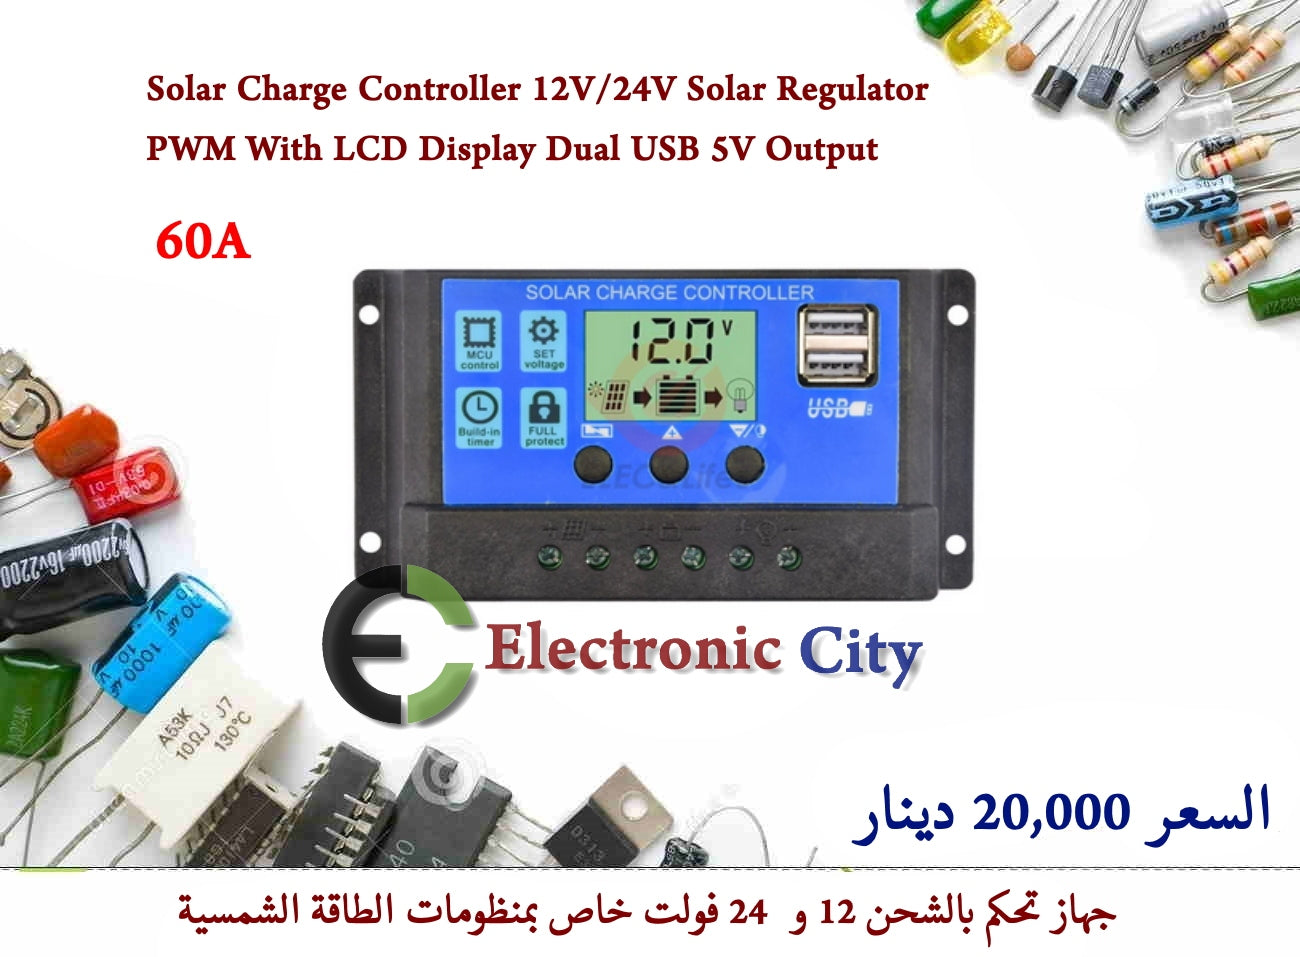 Solar Charge Controller 12V-24V Solar Regulator PWM With LCD Display Dual USB 5V Output 60A